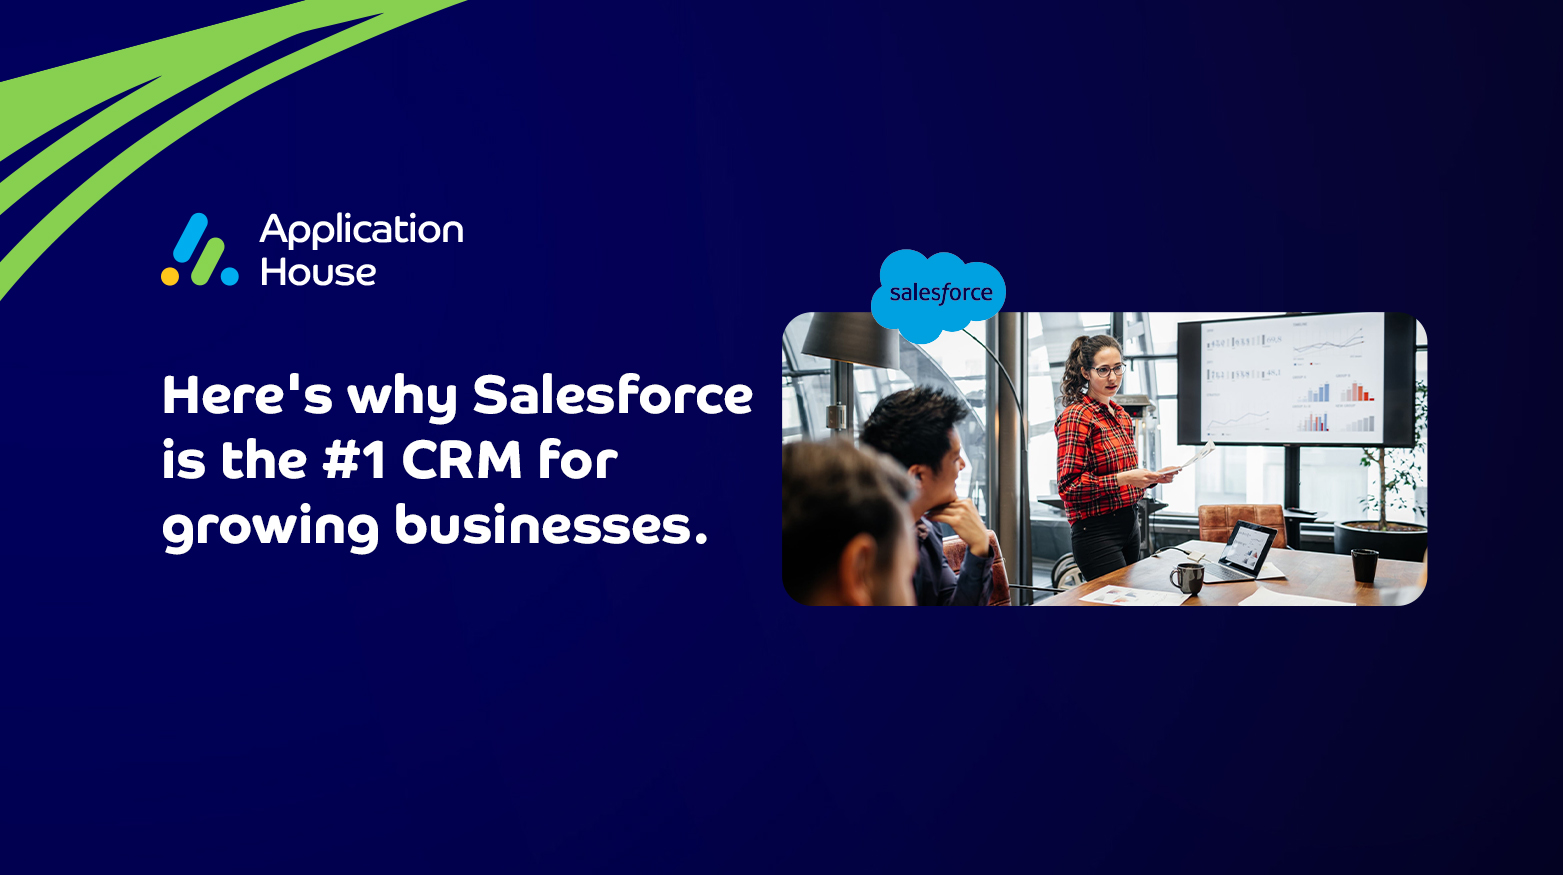 Here's why Salesforce is the #1 CRM for growing businesses